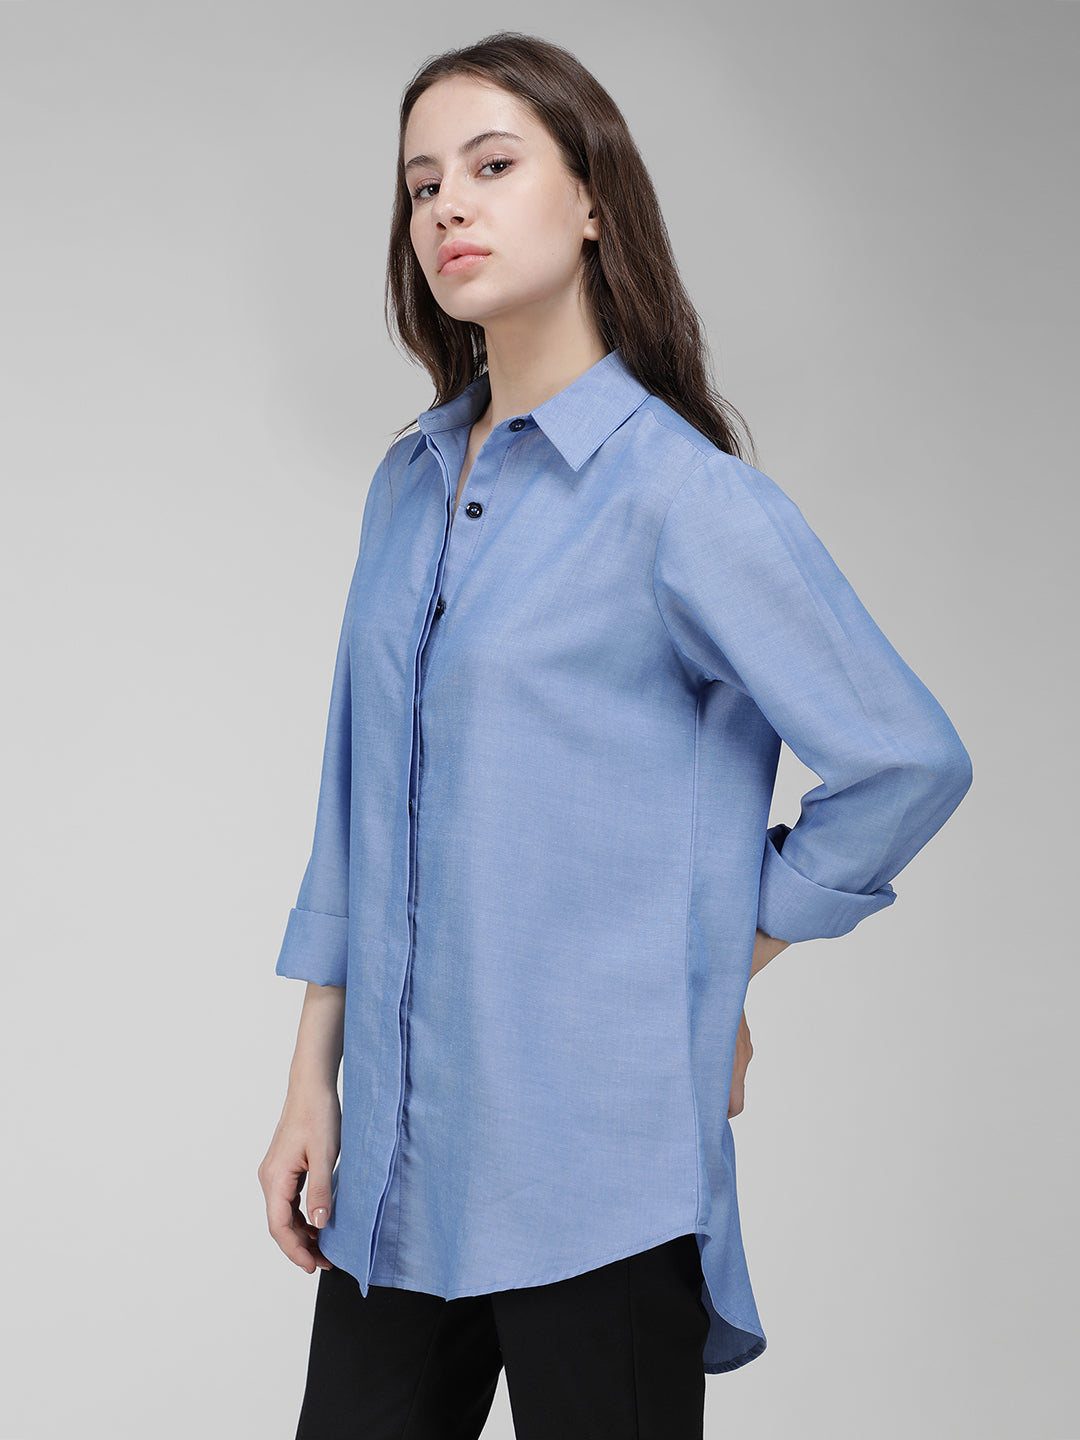 Concealed button shirt